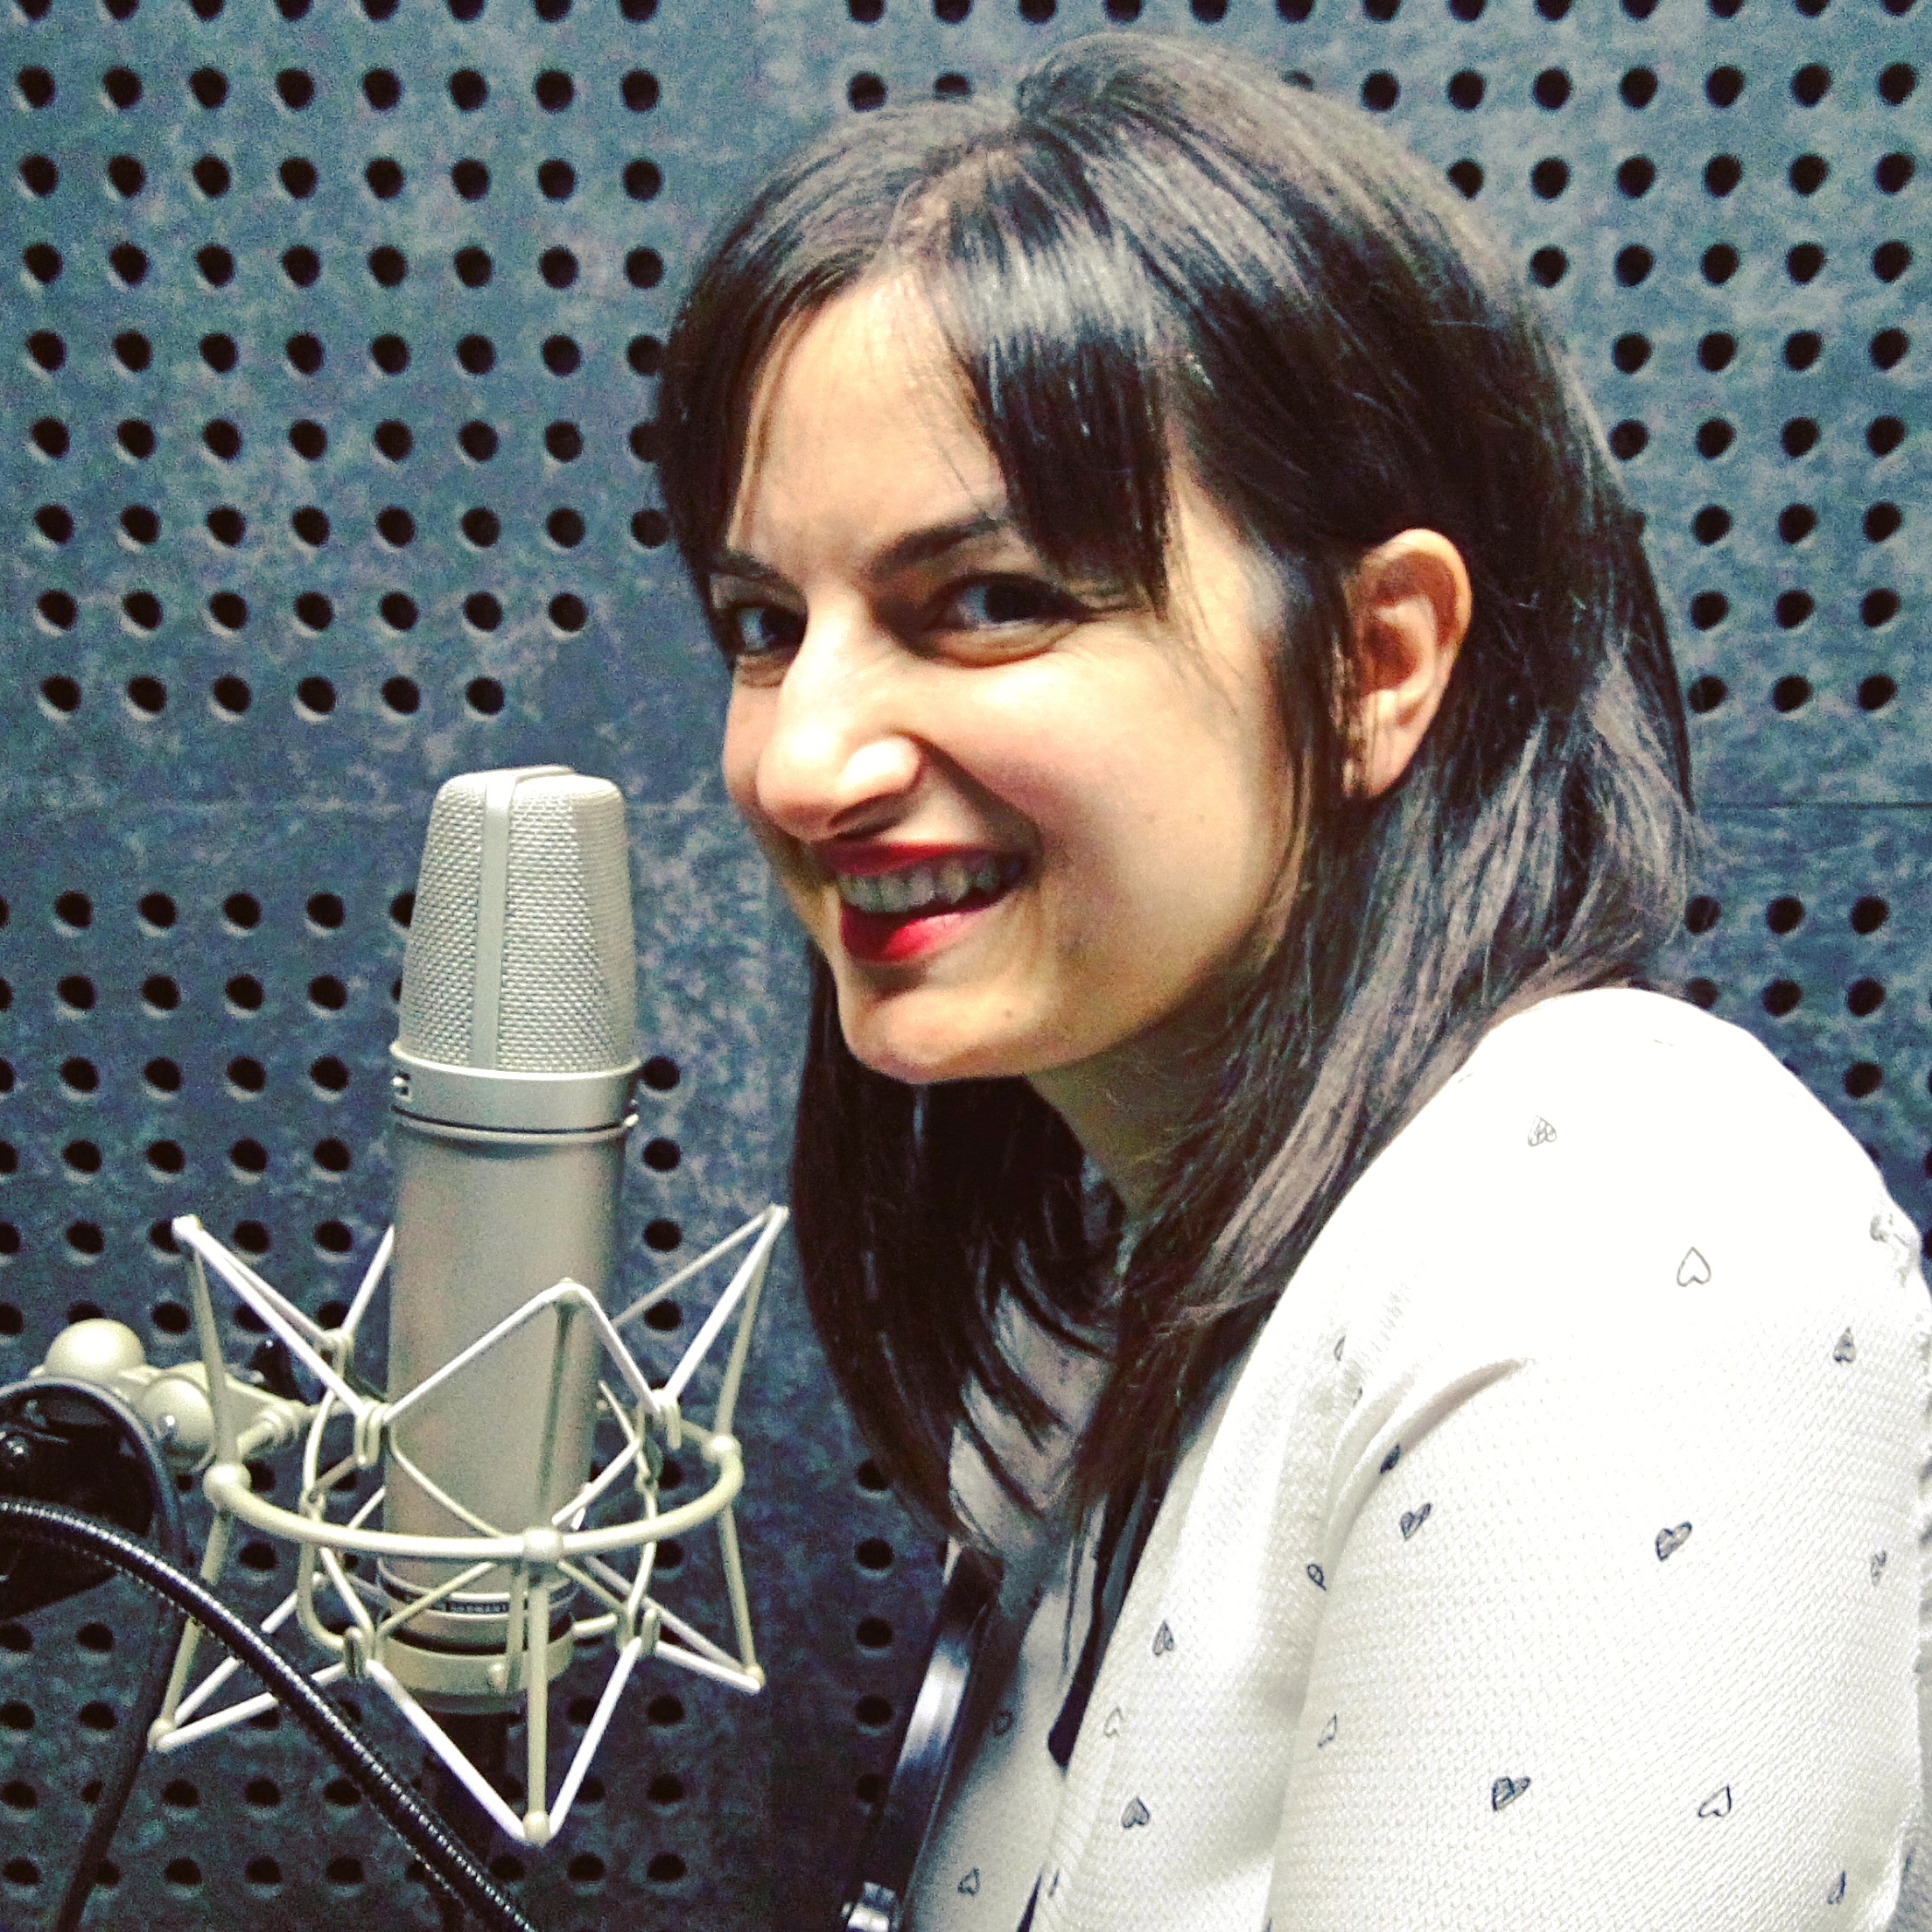 Megui Cabrera in a recording booth with a microphone.